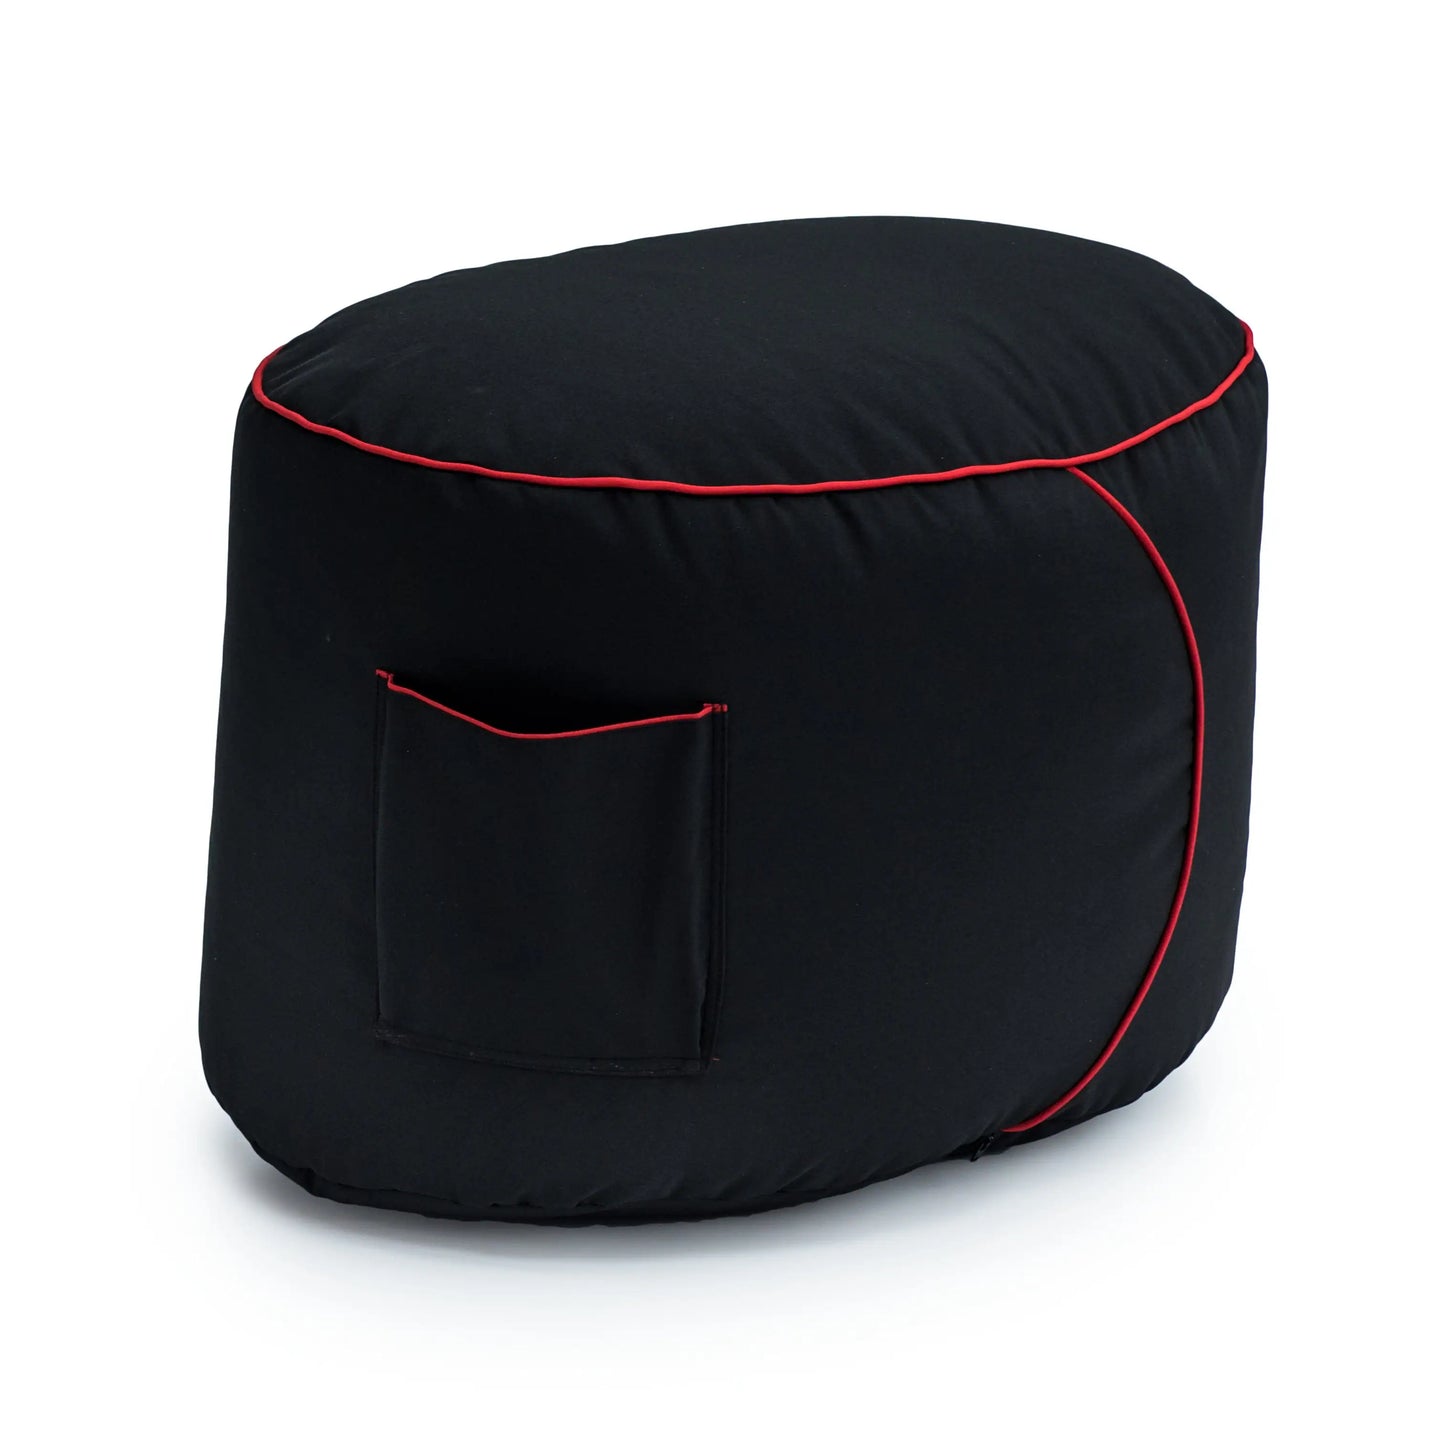 Black bean bag ottoman cover with red trim and "GAME OVER" logo